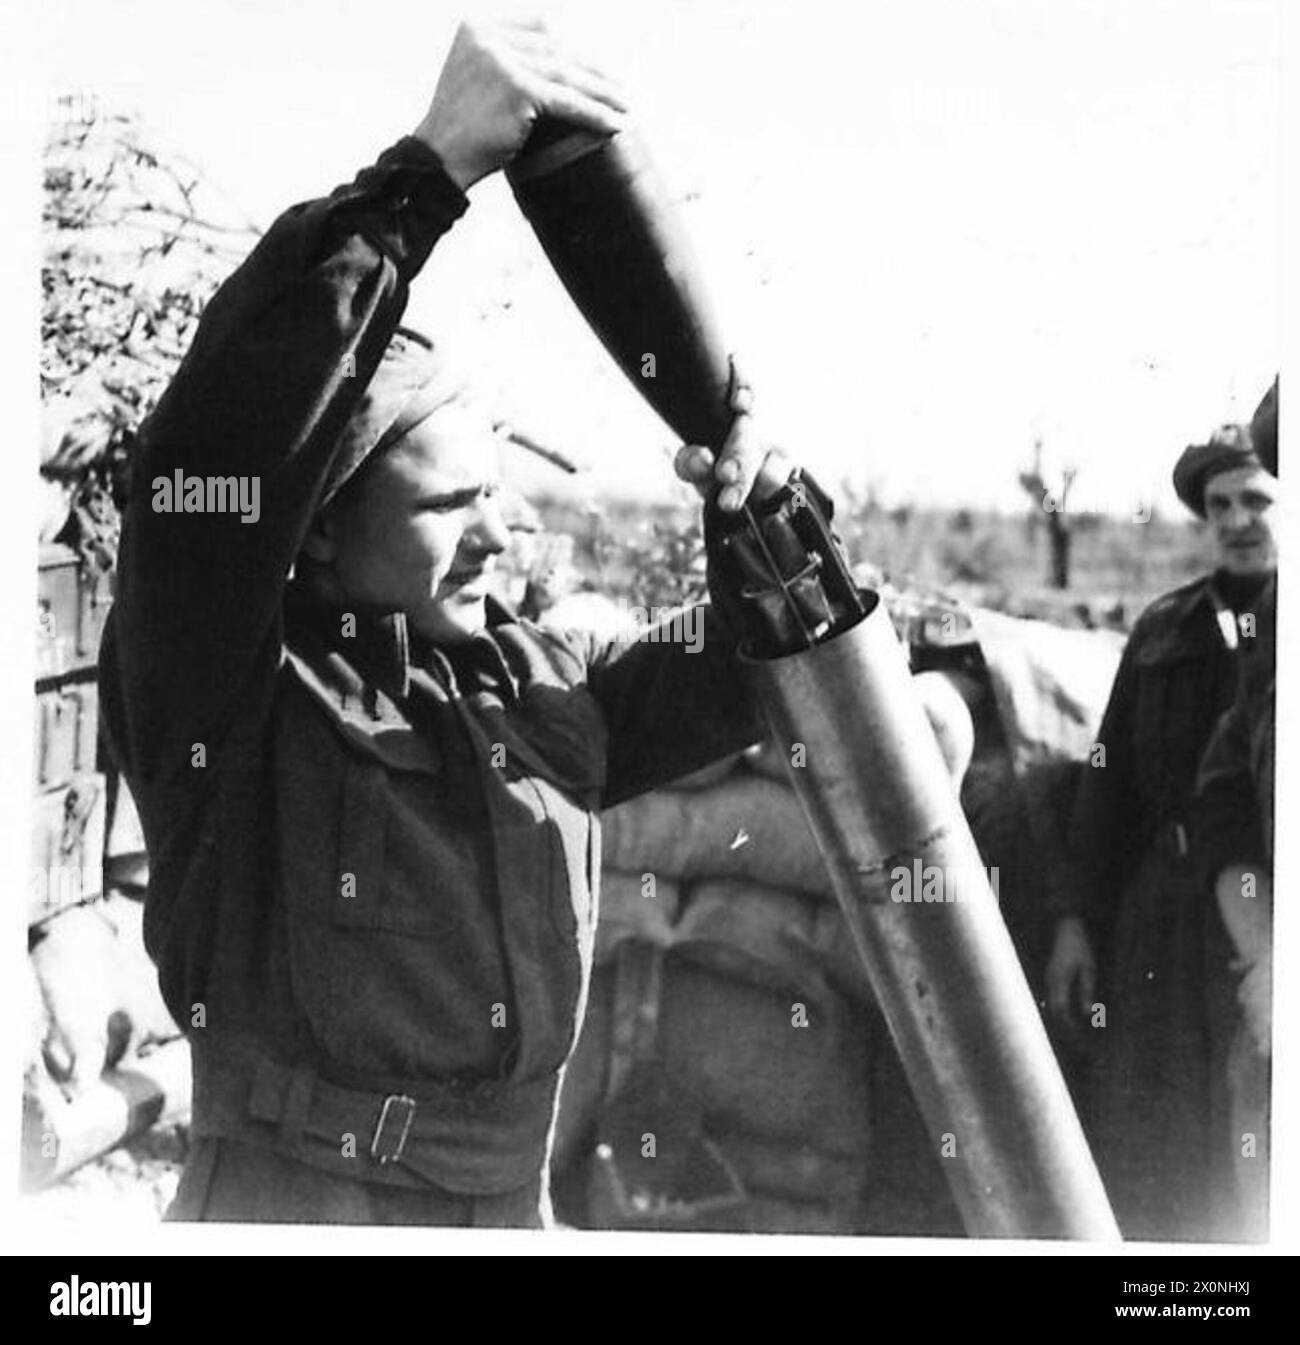 THE POLISH ARMY IN THE ITALIAN CAMPAIGN, 1943-1945 - Private Pisarczyk was a native of Ciołkowice, Poland. Private Józef Pisarczyk (?), a soldier of the 3rd Mortar Company, 5th Kresowa Division (2nd Polish Corps), loading a 4.2 inch heavy mortar in a dugout near the town of Castel Bolognese, 22 March 1945 British Army, Polish Army, Polish Armed Forces in the West, Polish Corps, II, Polish Armed Forces in the West, 2nd Corps, 5th 'Kresowa' Infantry Division, 8th Army Stock Photo